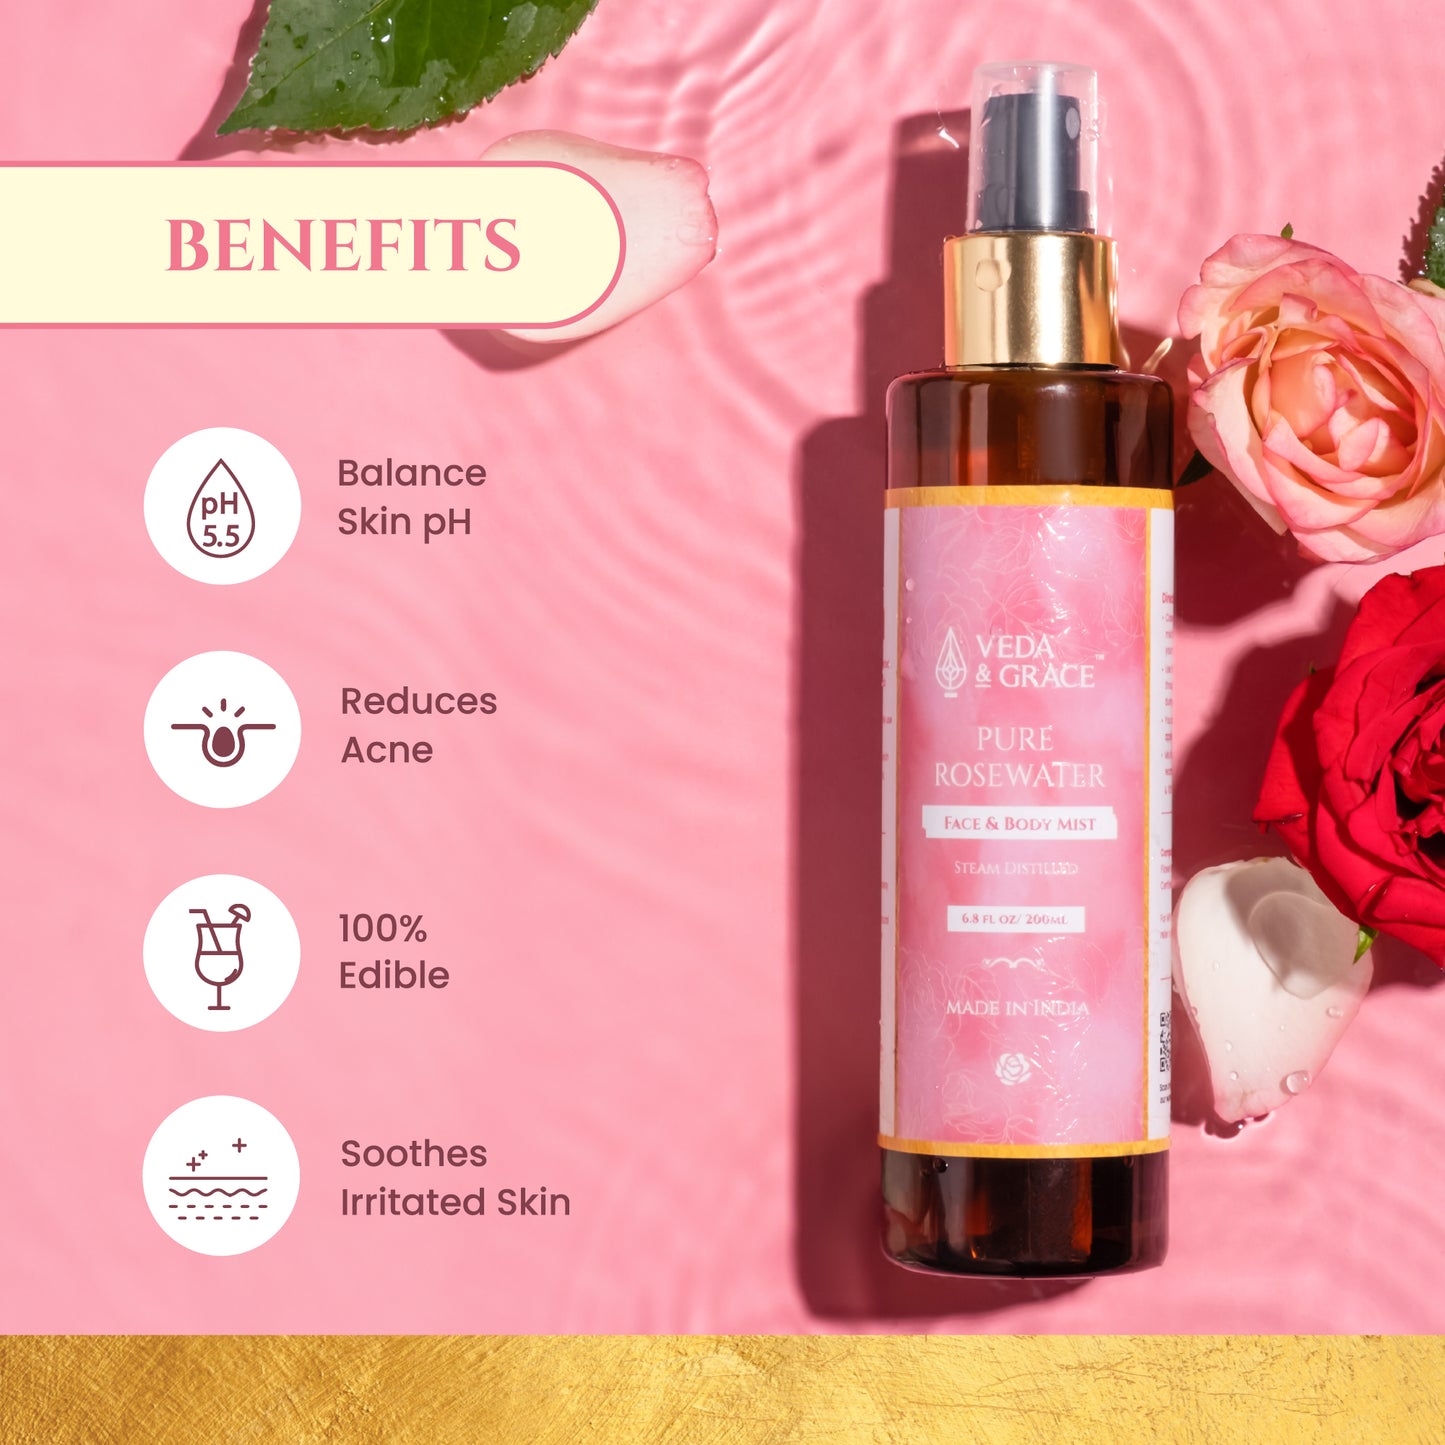 100% Pure Rosewater - Face & Body Mist